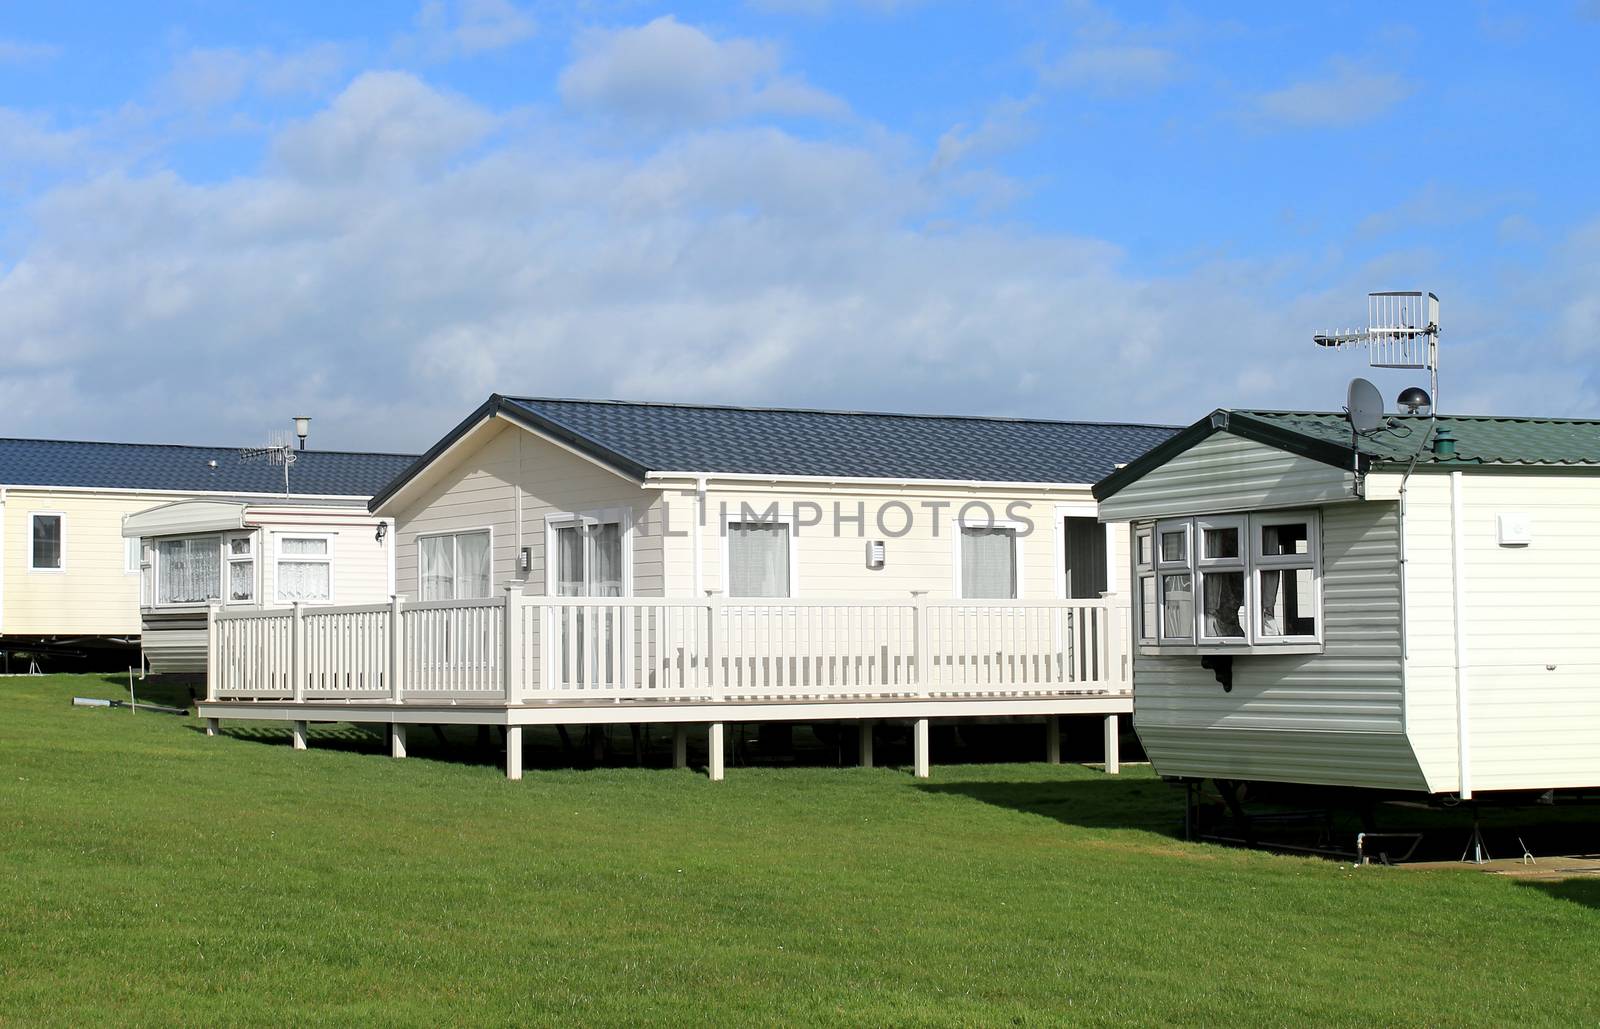 Scenic view of a caravan trailer park in Summer, Scarborough, England.